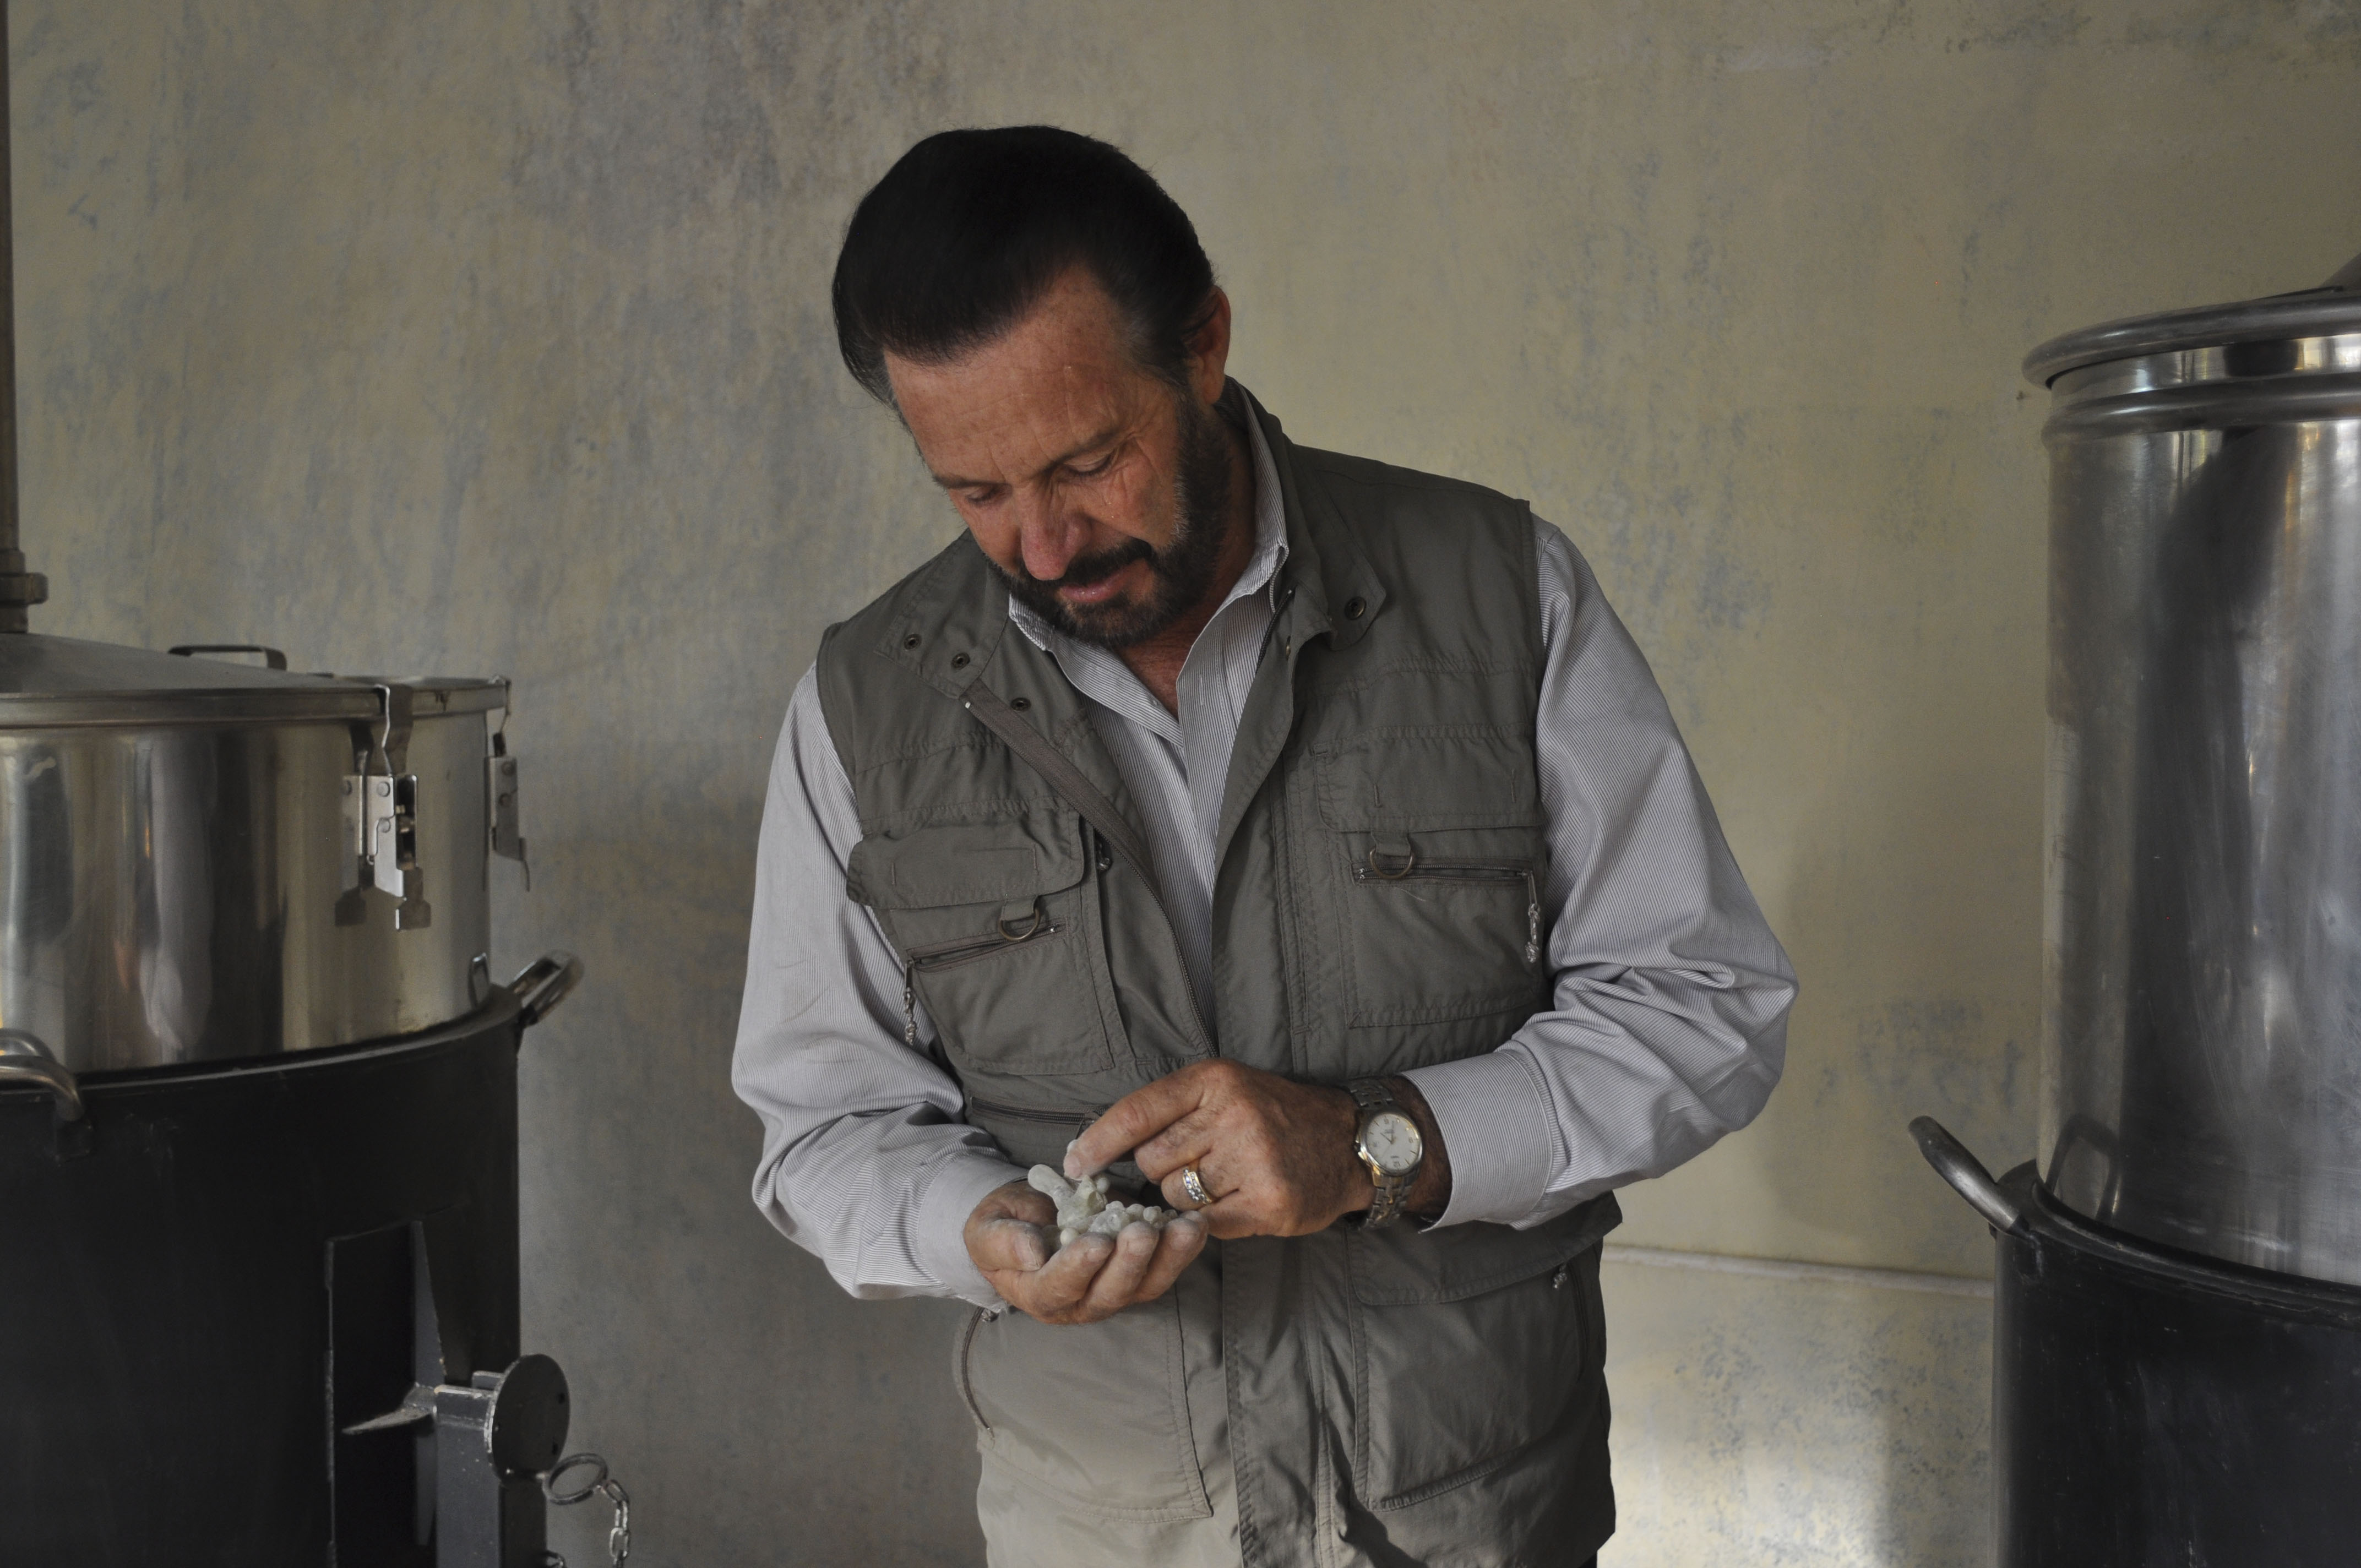 Gary Young inspects the essential oil distilling process